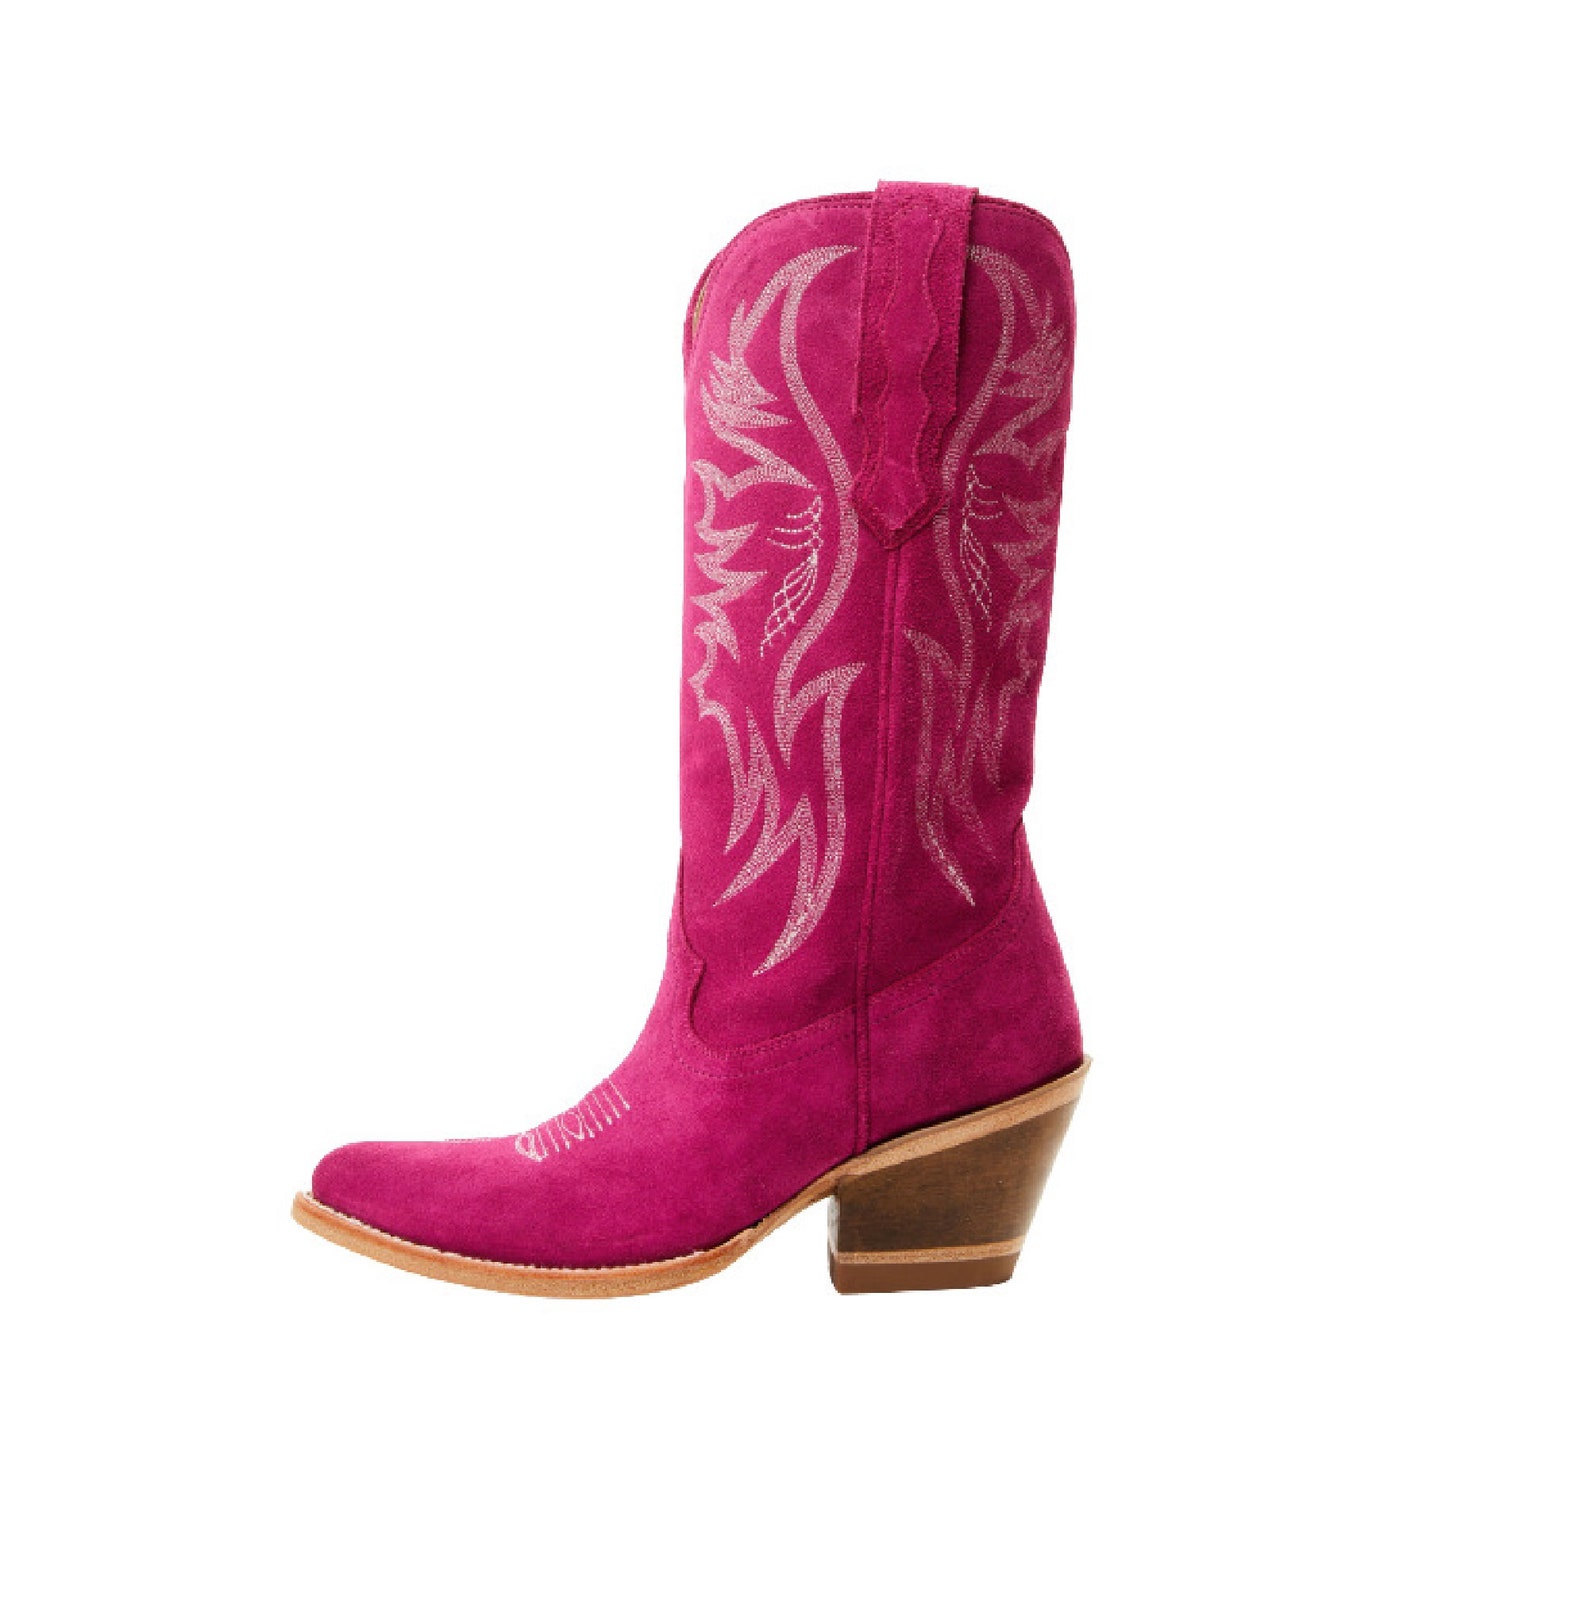 Idyllwind Womens Charmed Life Western Boots cognac - Etsy